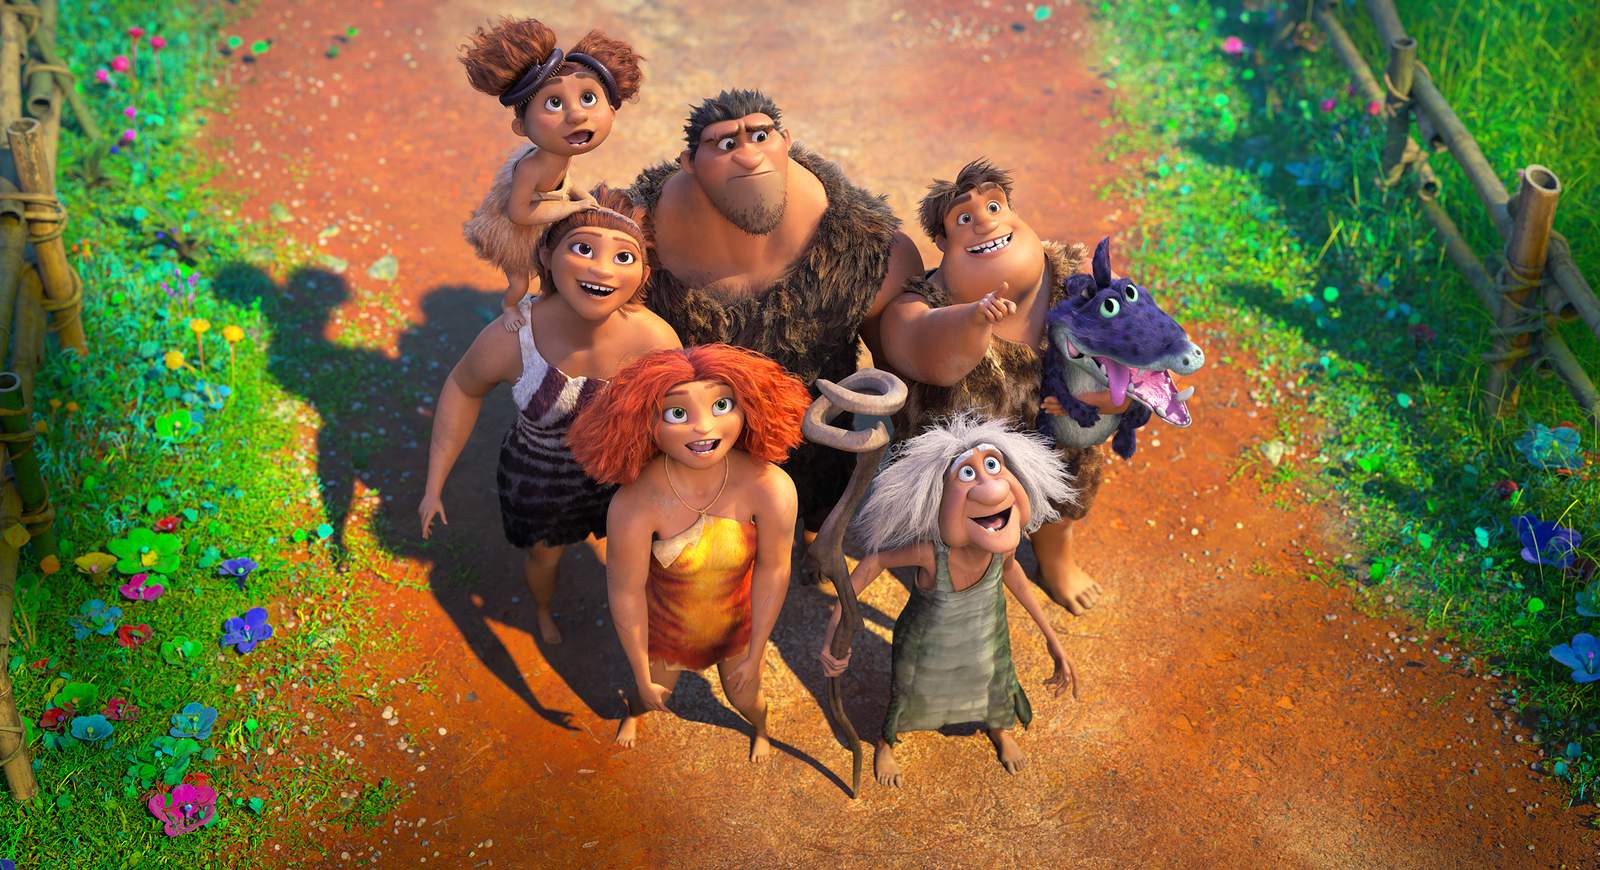 Testing new release strategy, 'The Croods' opens to $14.2M